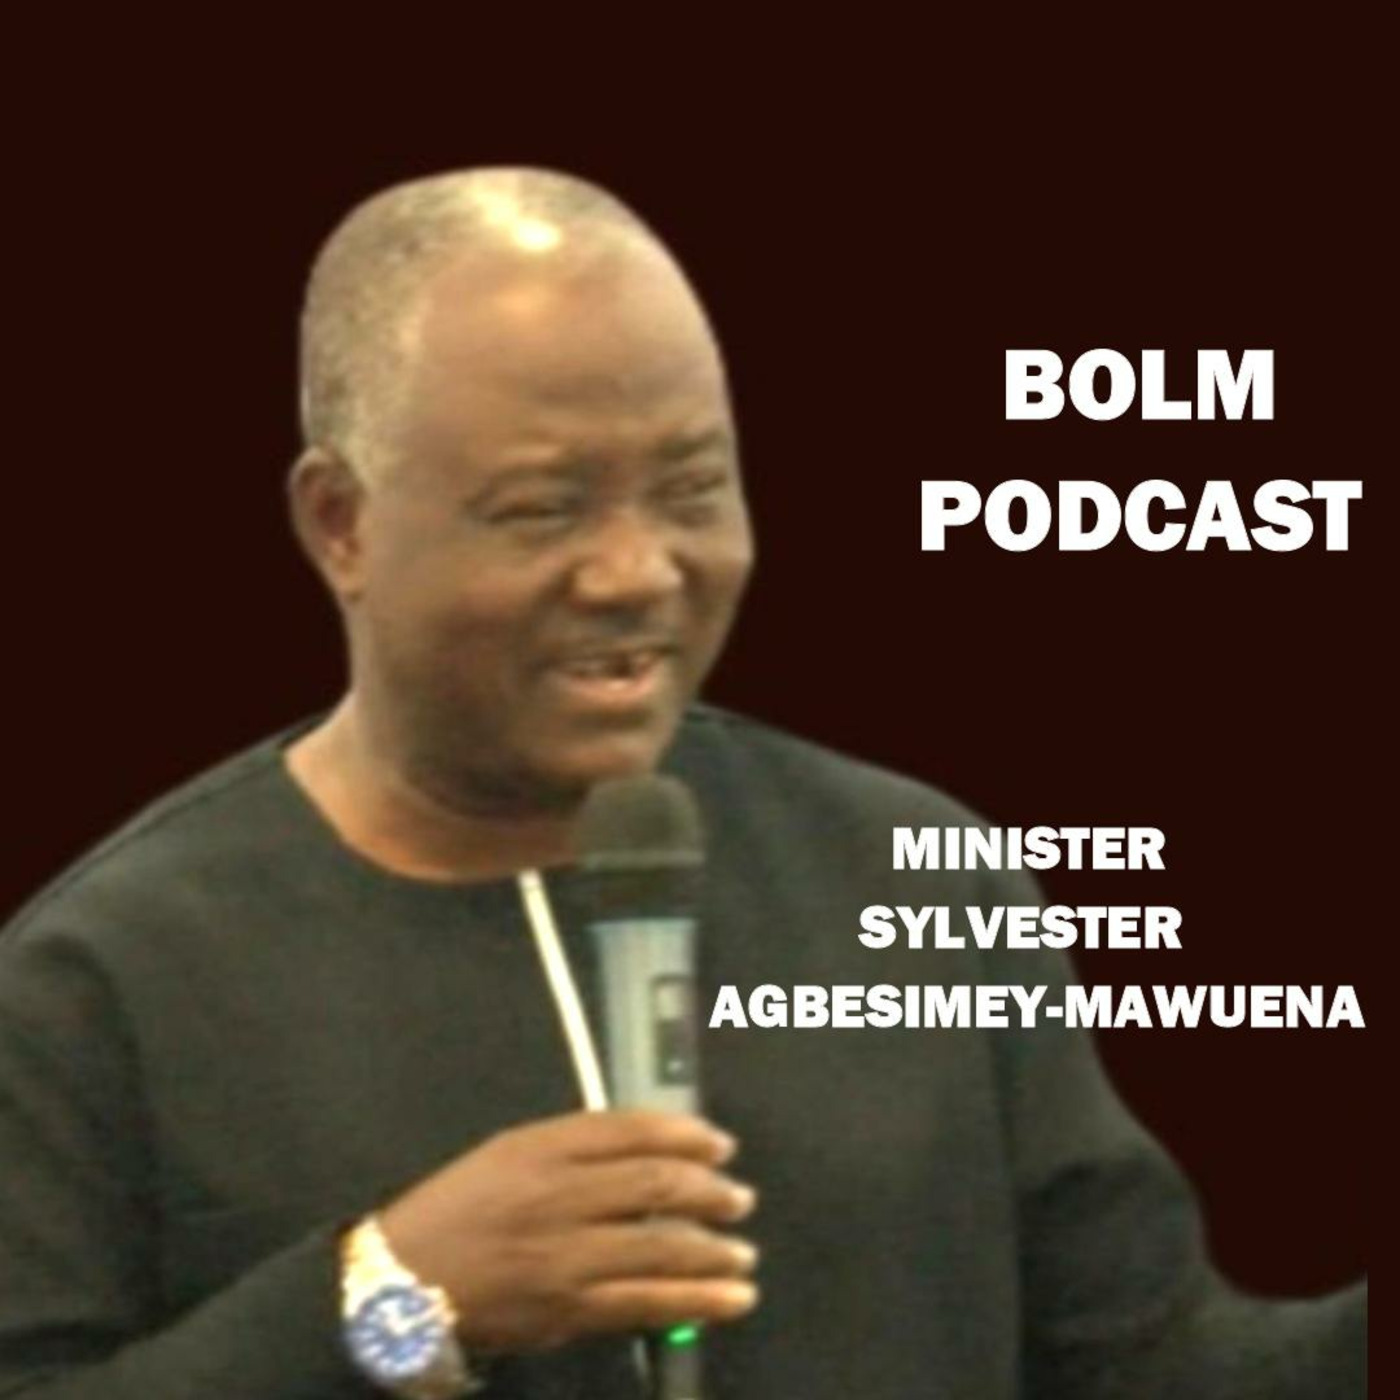 Episode 117: THE LORDSHIP OF CHRIST | MINISTER SYLVESTER AGBESIMEY-MAWUENA